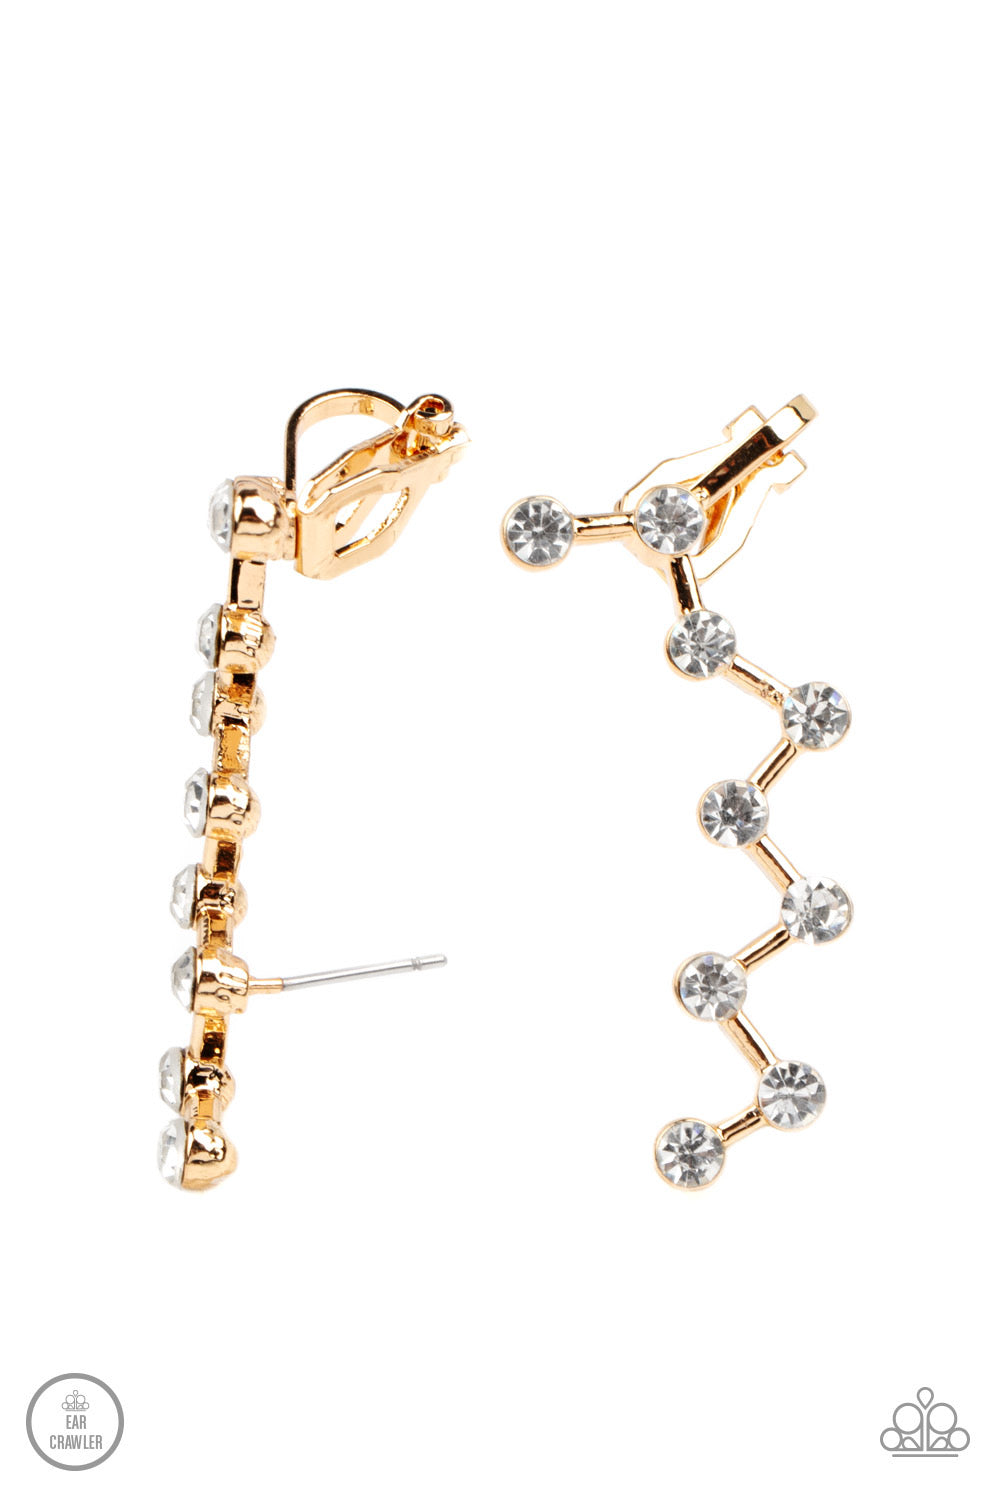 Paparazzi Clamoring Constellations - Gold Earrings - Ear Crawlers - Paparazzi Jewelry Images 